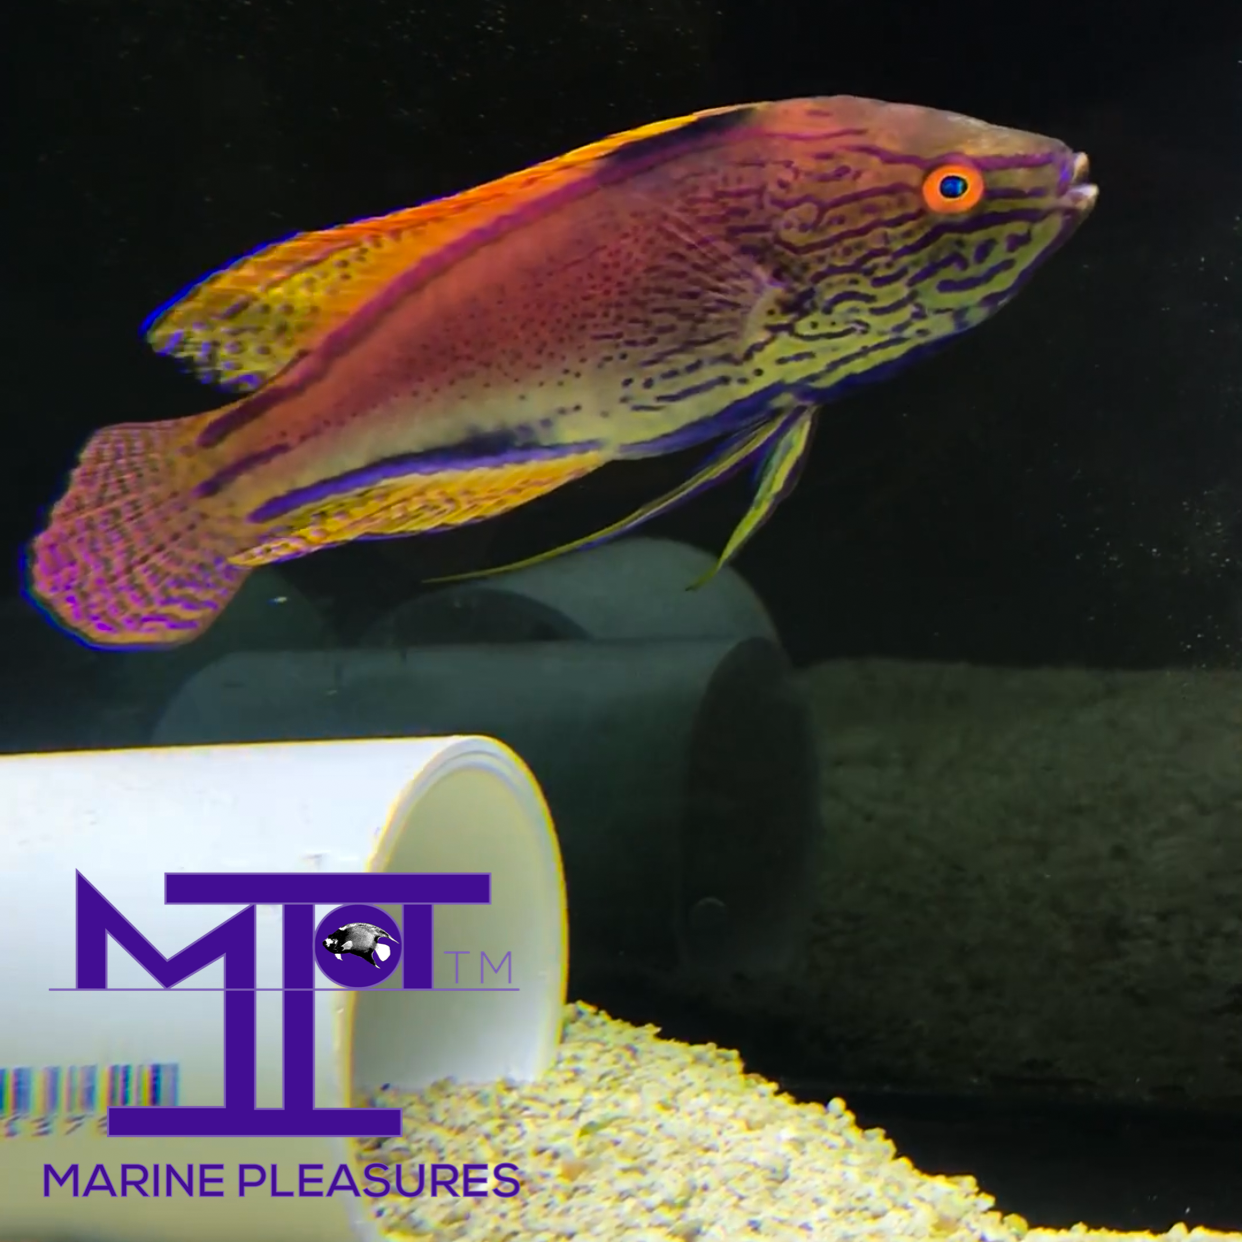 Aussie Lineatus Fairy Wrasse - (Male)